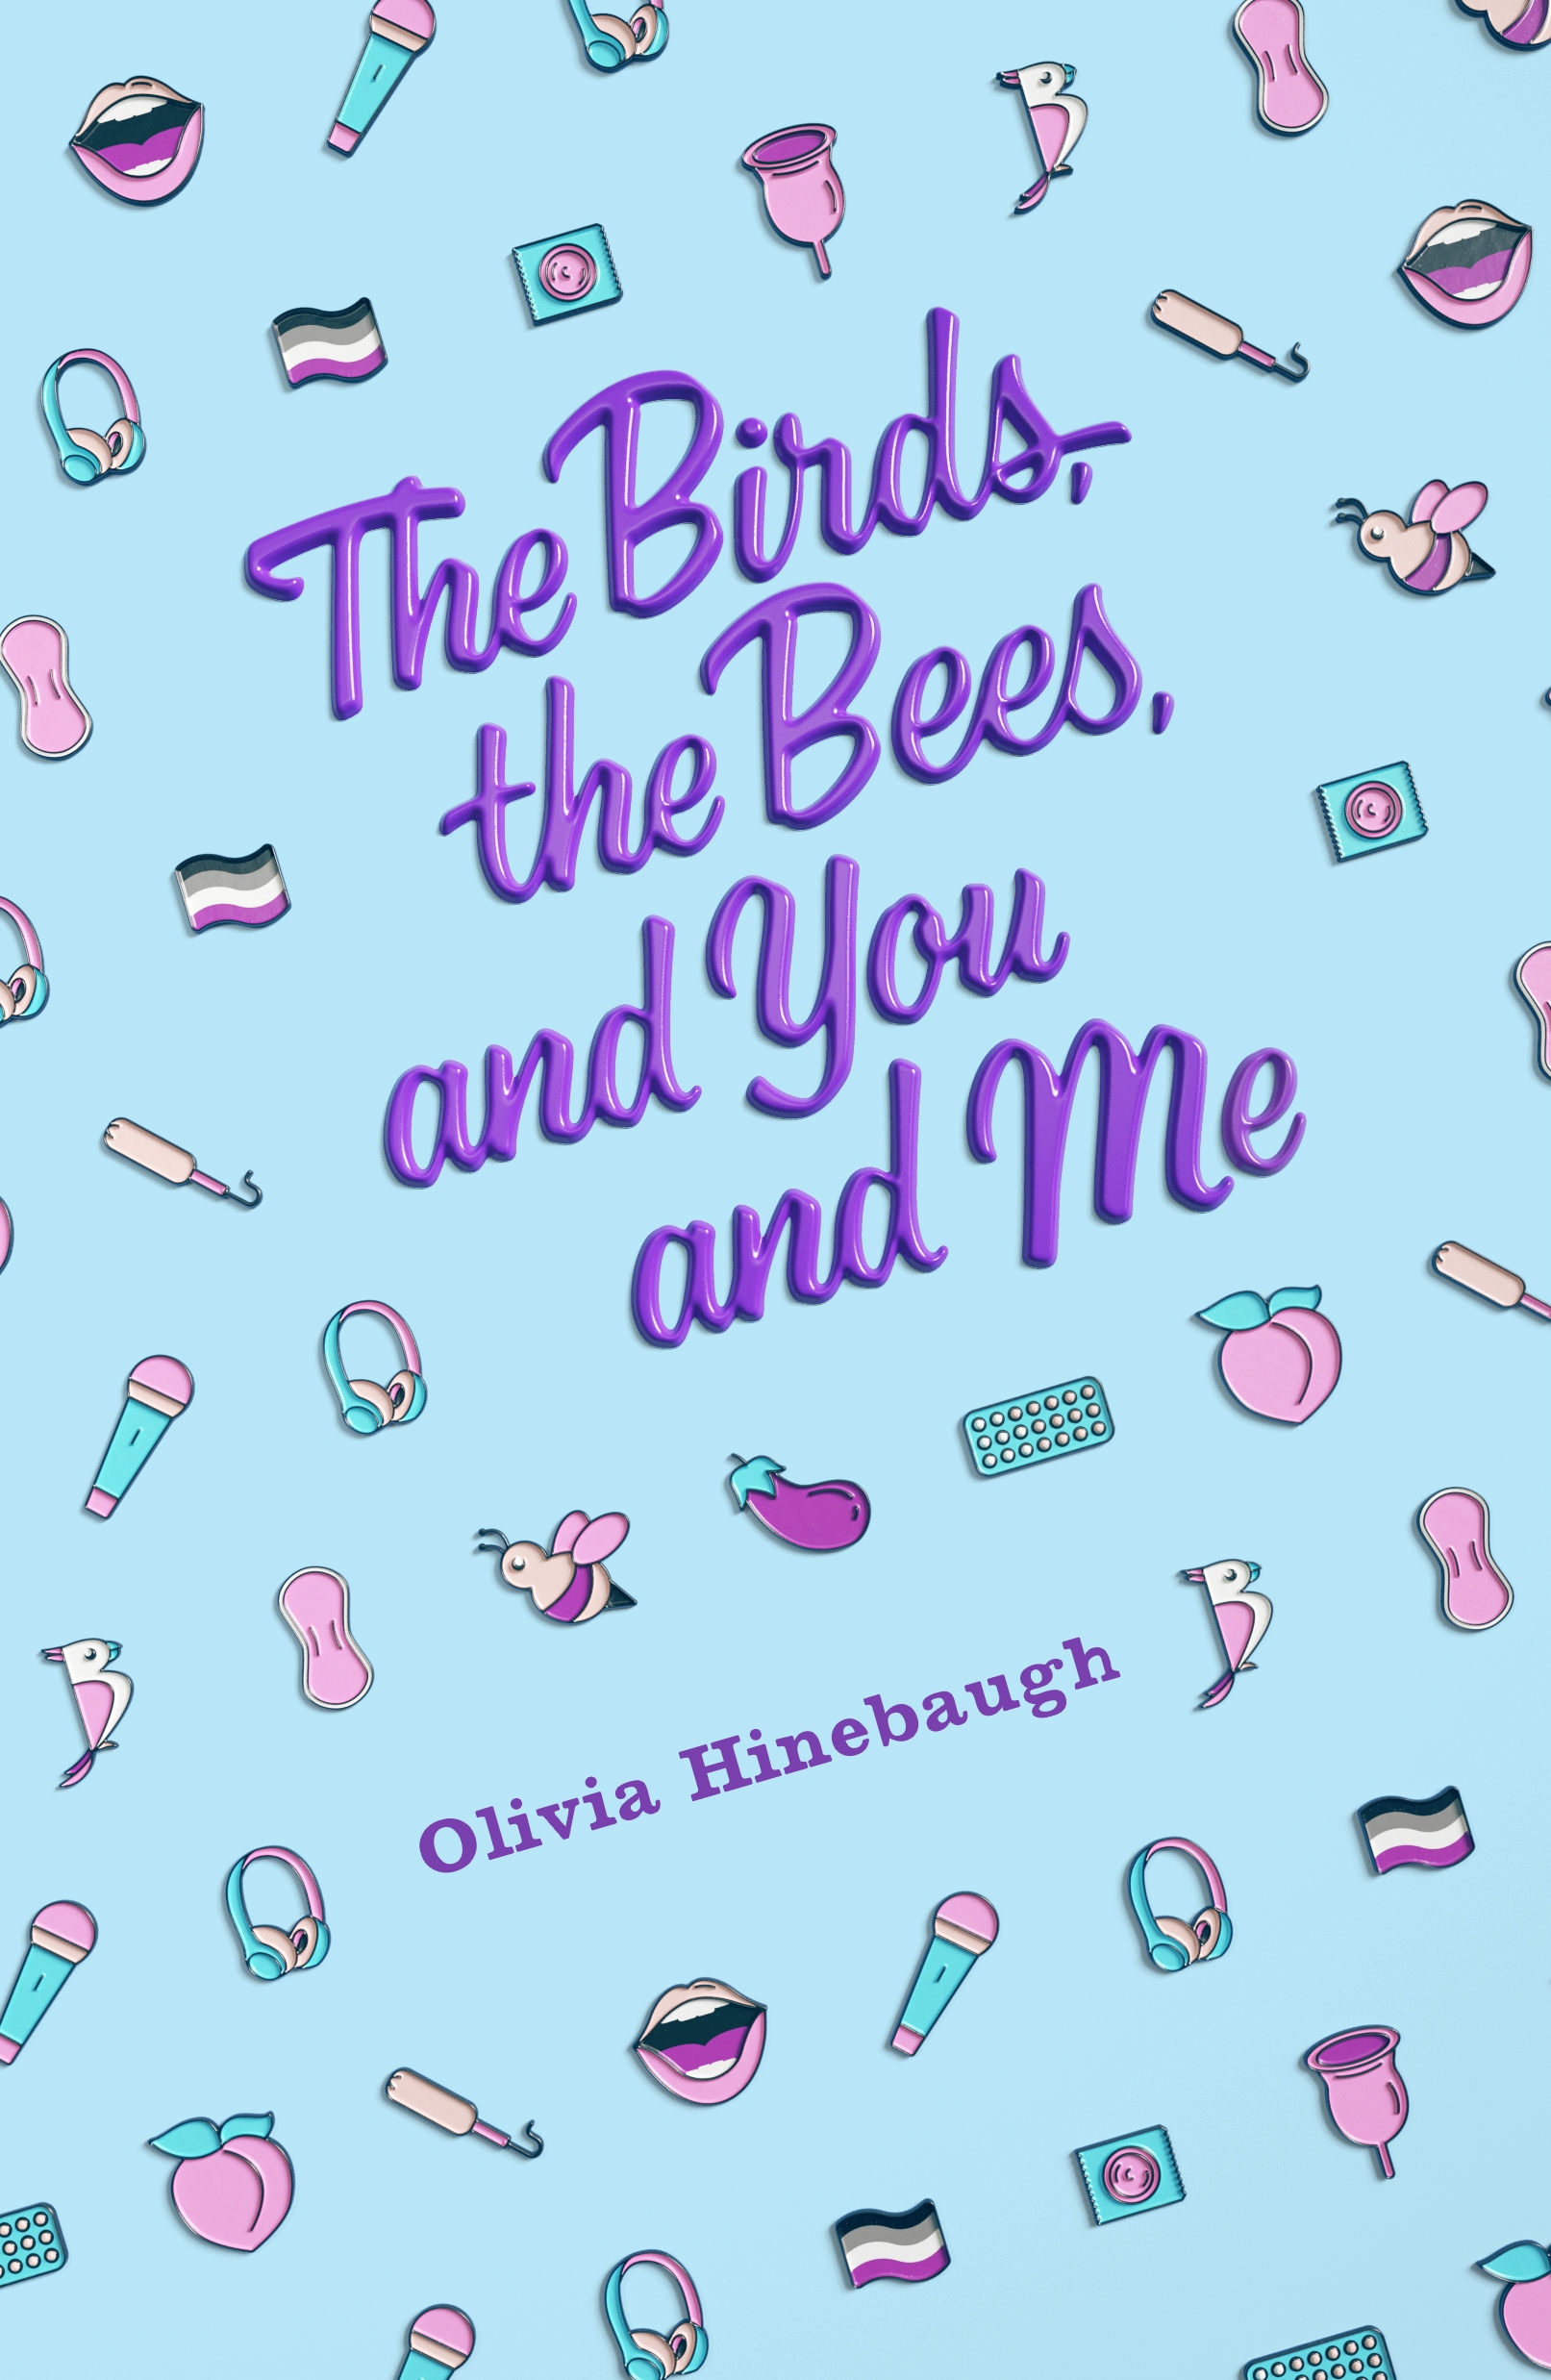 Book The Birds, the Bees, and You and Me